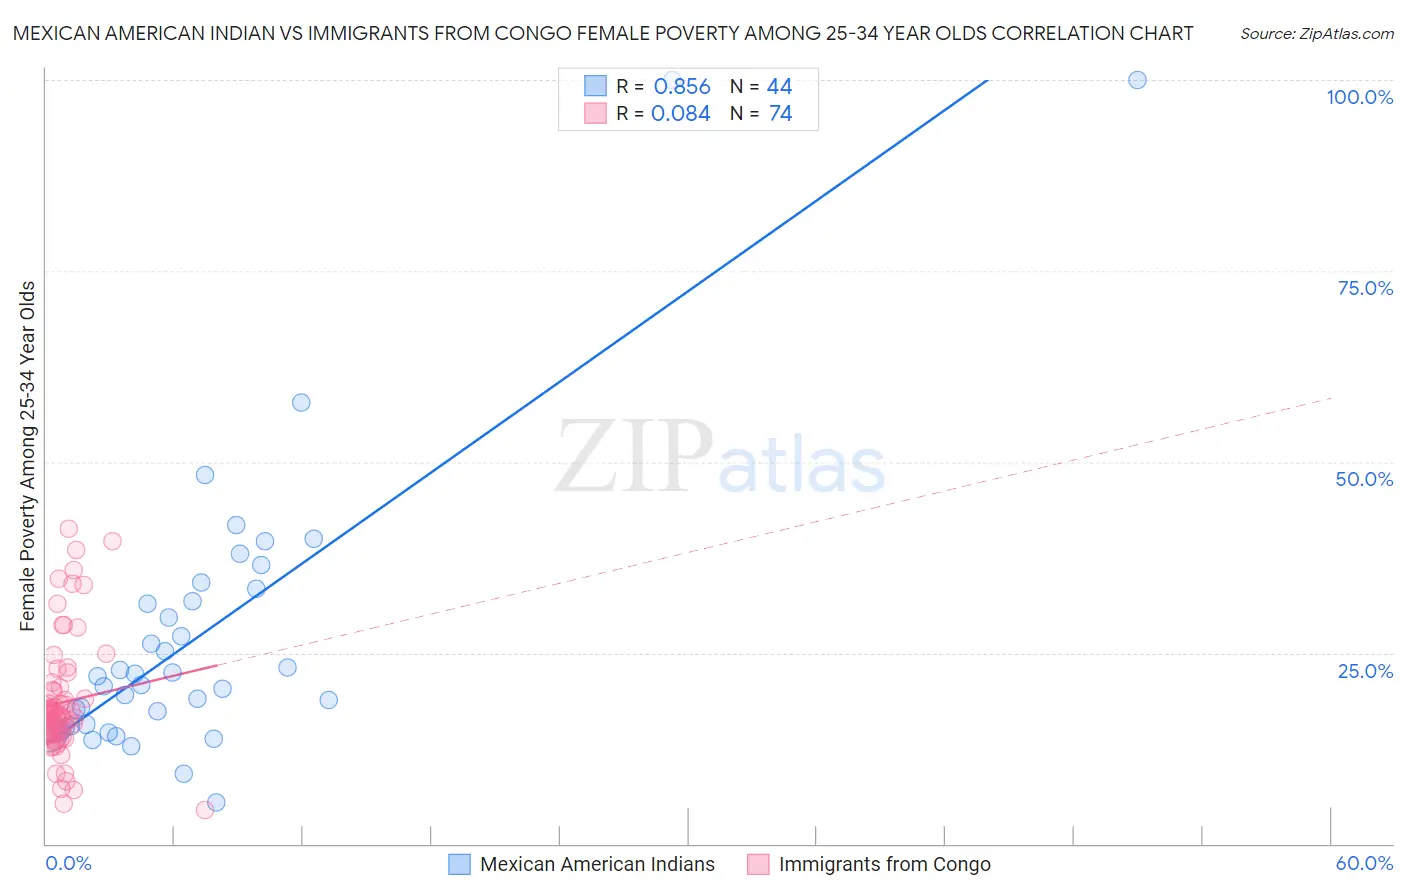 Mexican American Indian vs Immigrants from Congo Female Poverty Among 25-34 Year Olds